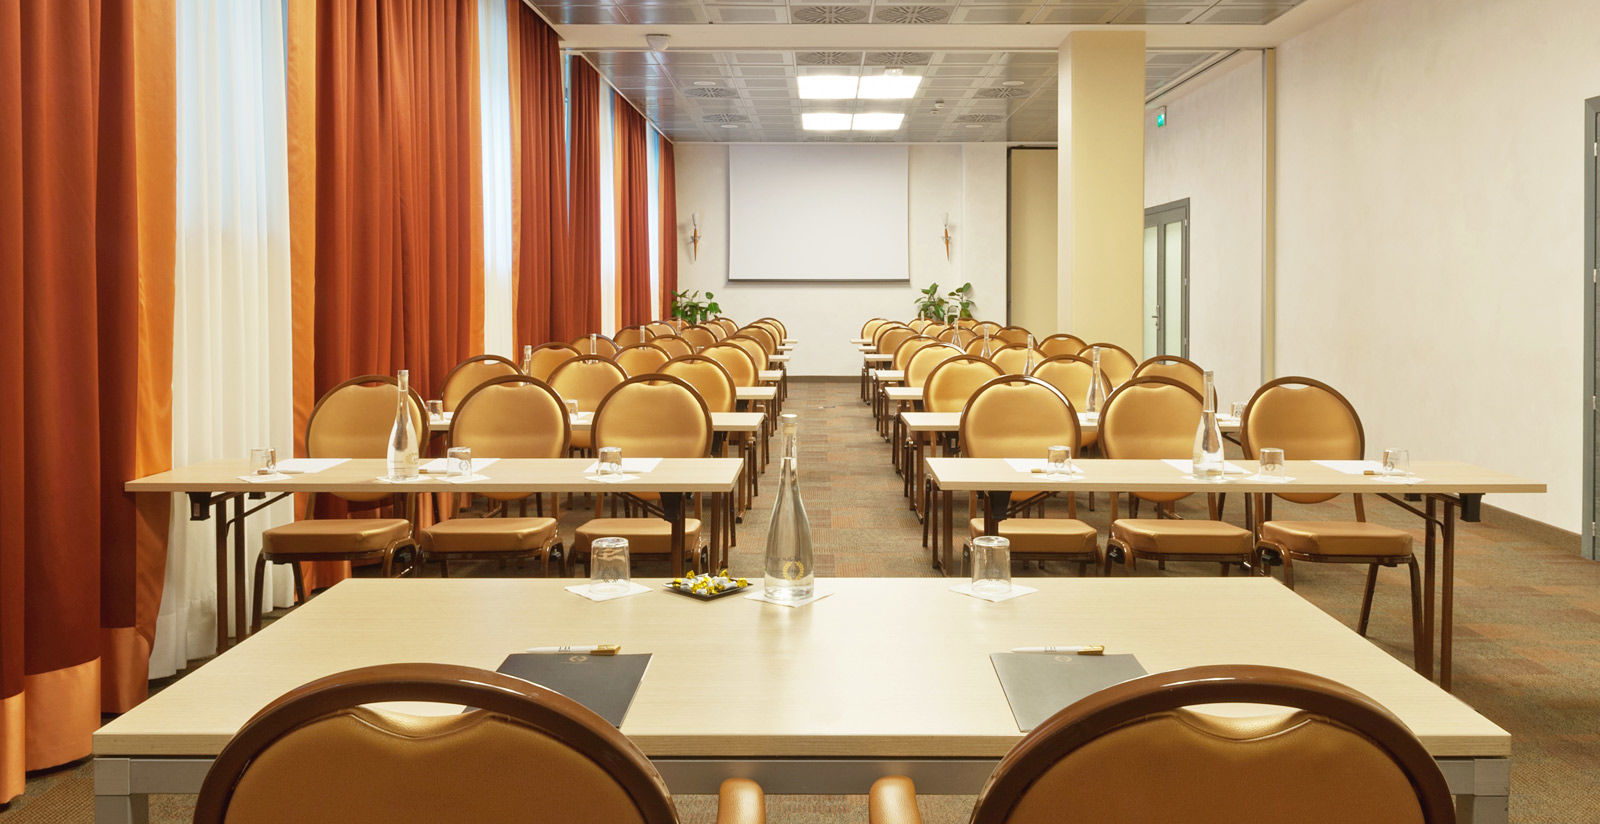 Il Globo Firenze - Meeting Rooms in Florence Italy 3